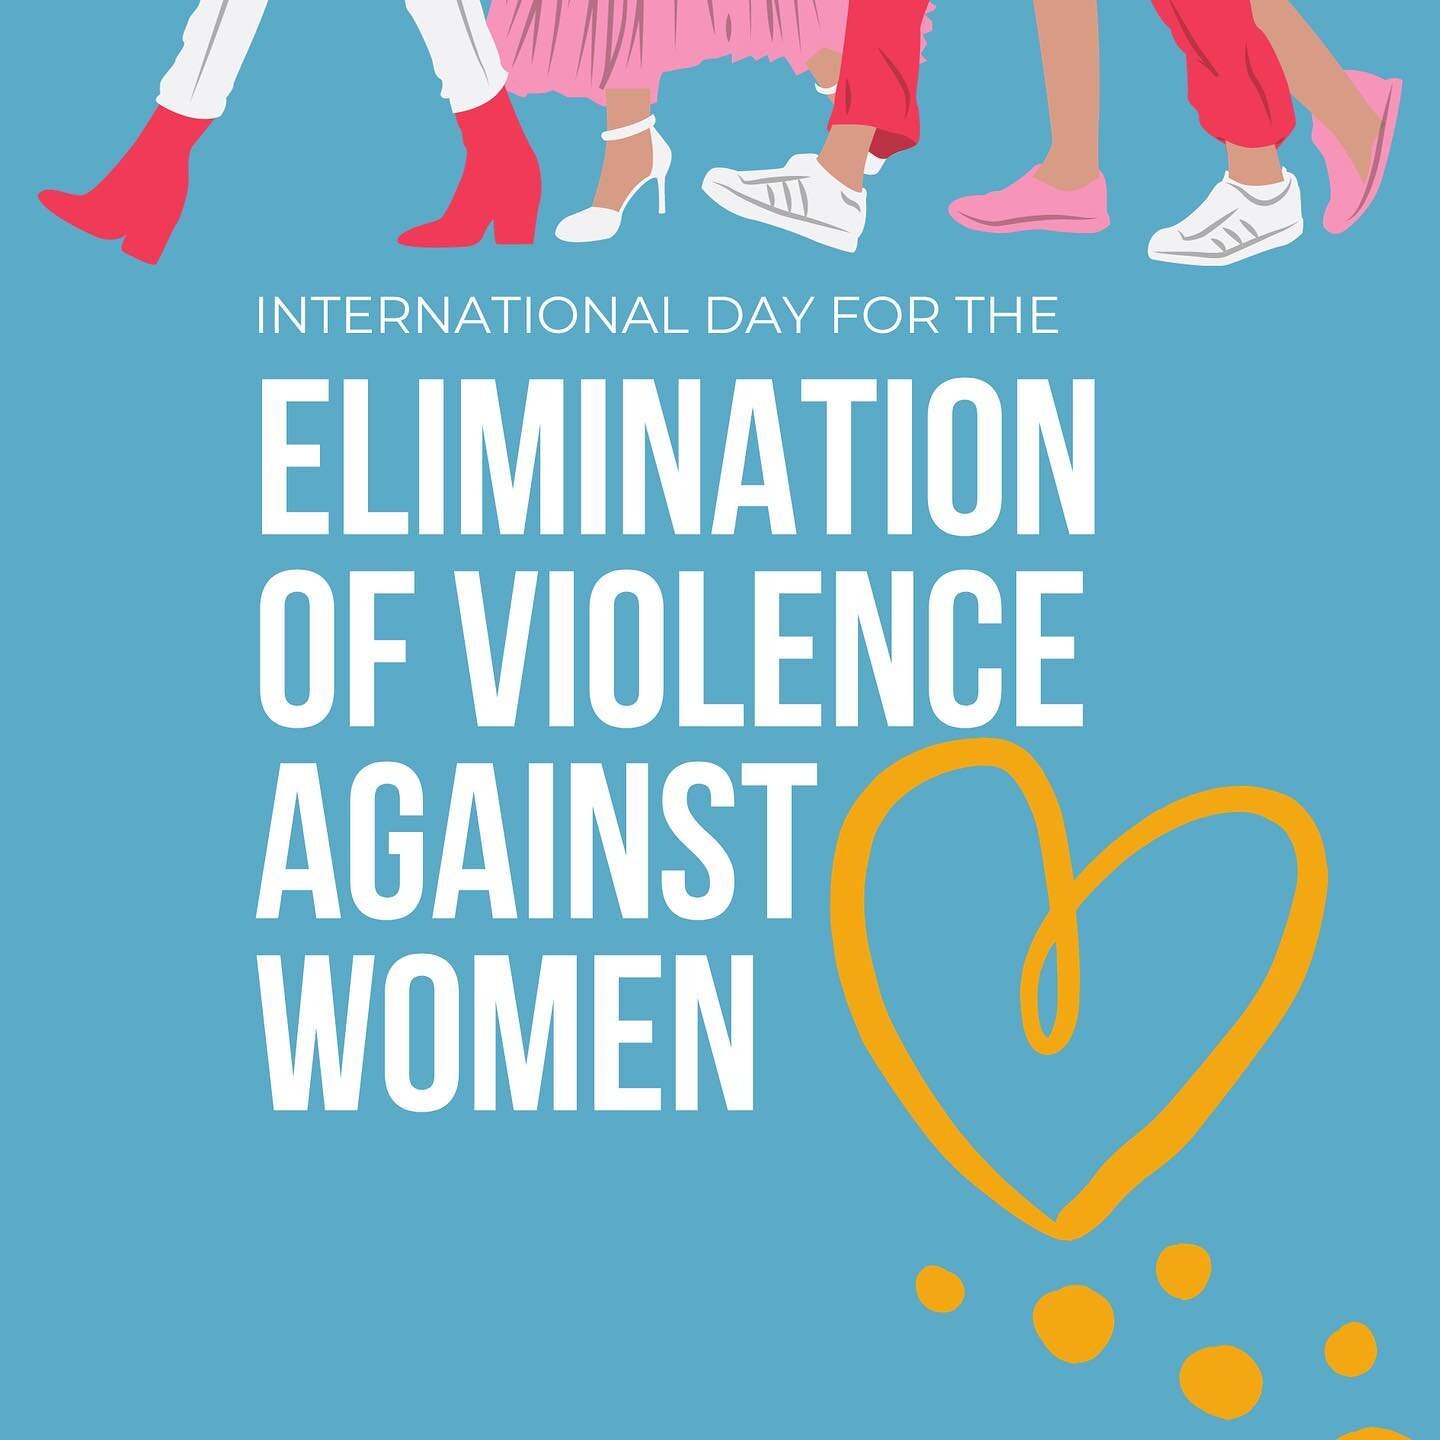 Today is the International Day for the Elimination of Violence against Women, which was created to raise awareness of the harsh realities that many women face. In a world that should be free from fear, it&rsquo;s crucial to shine a light on the issue